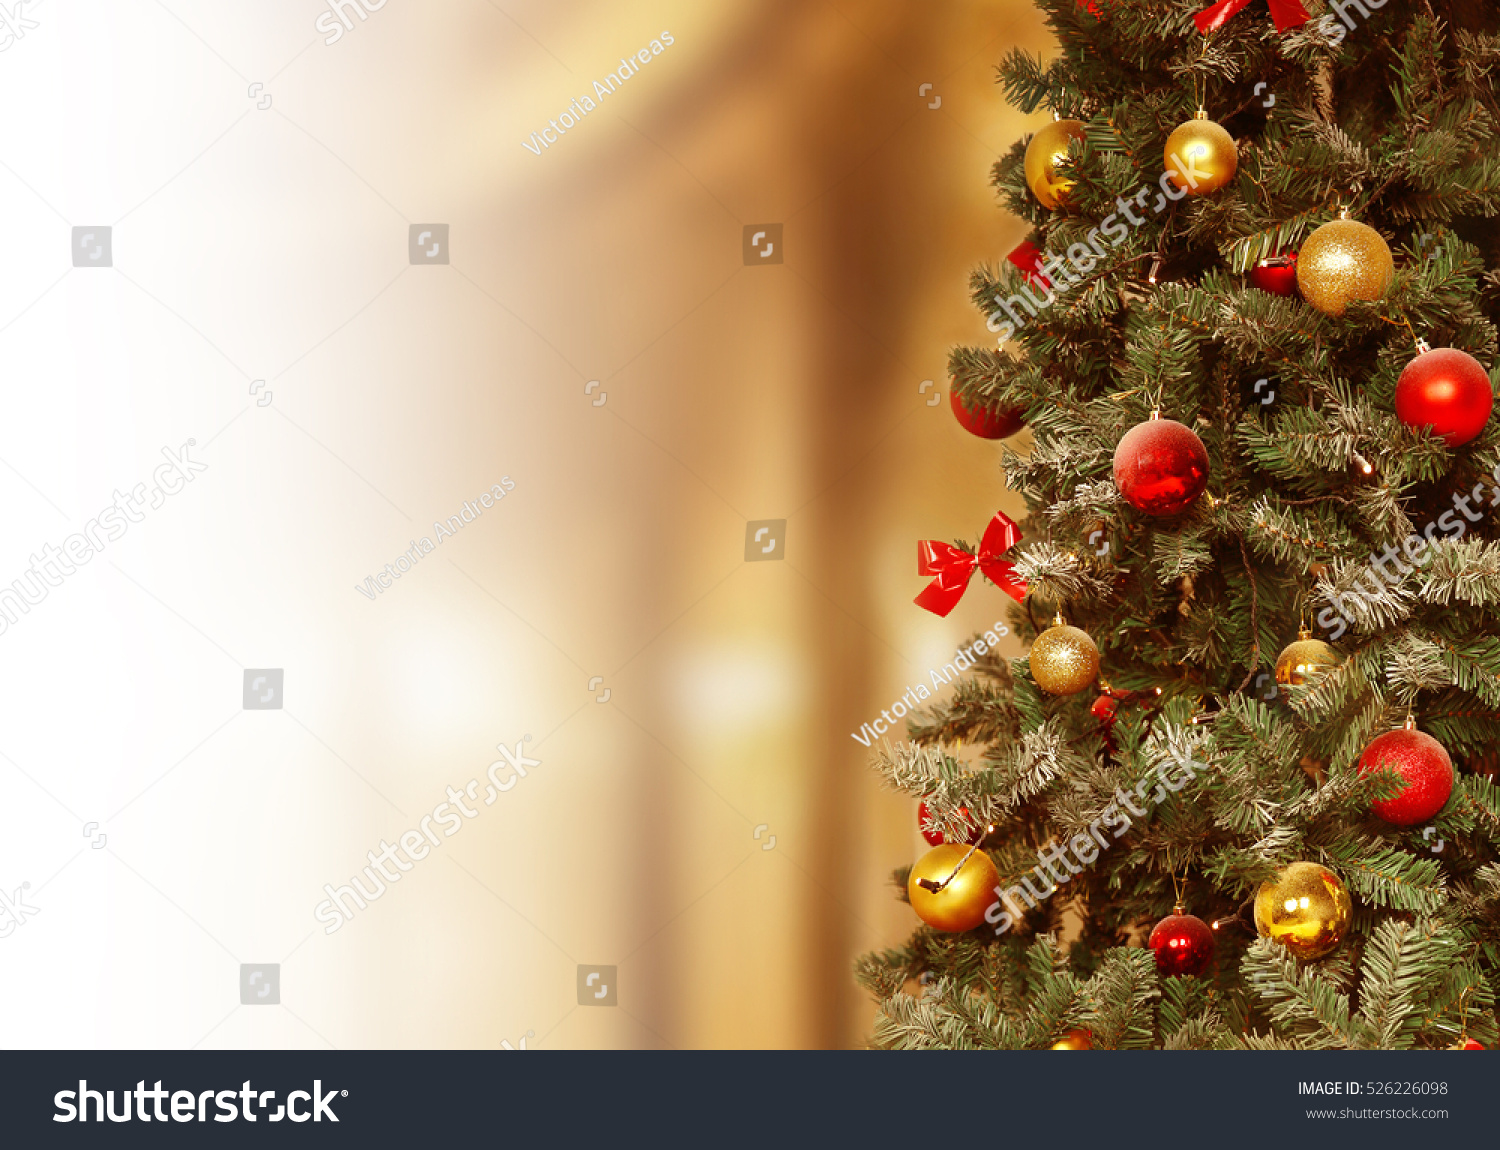  Christmas tree, gifts background. December, winter holiday xmas decoration. #526226098